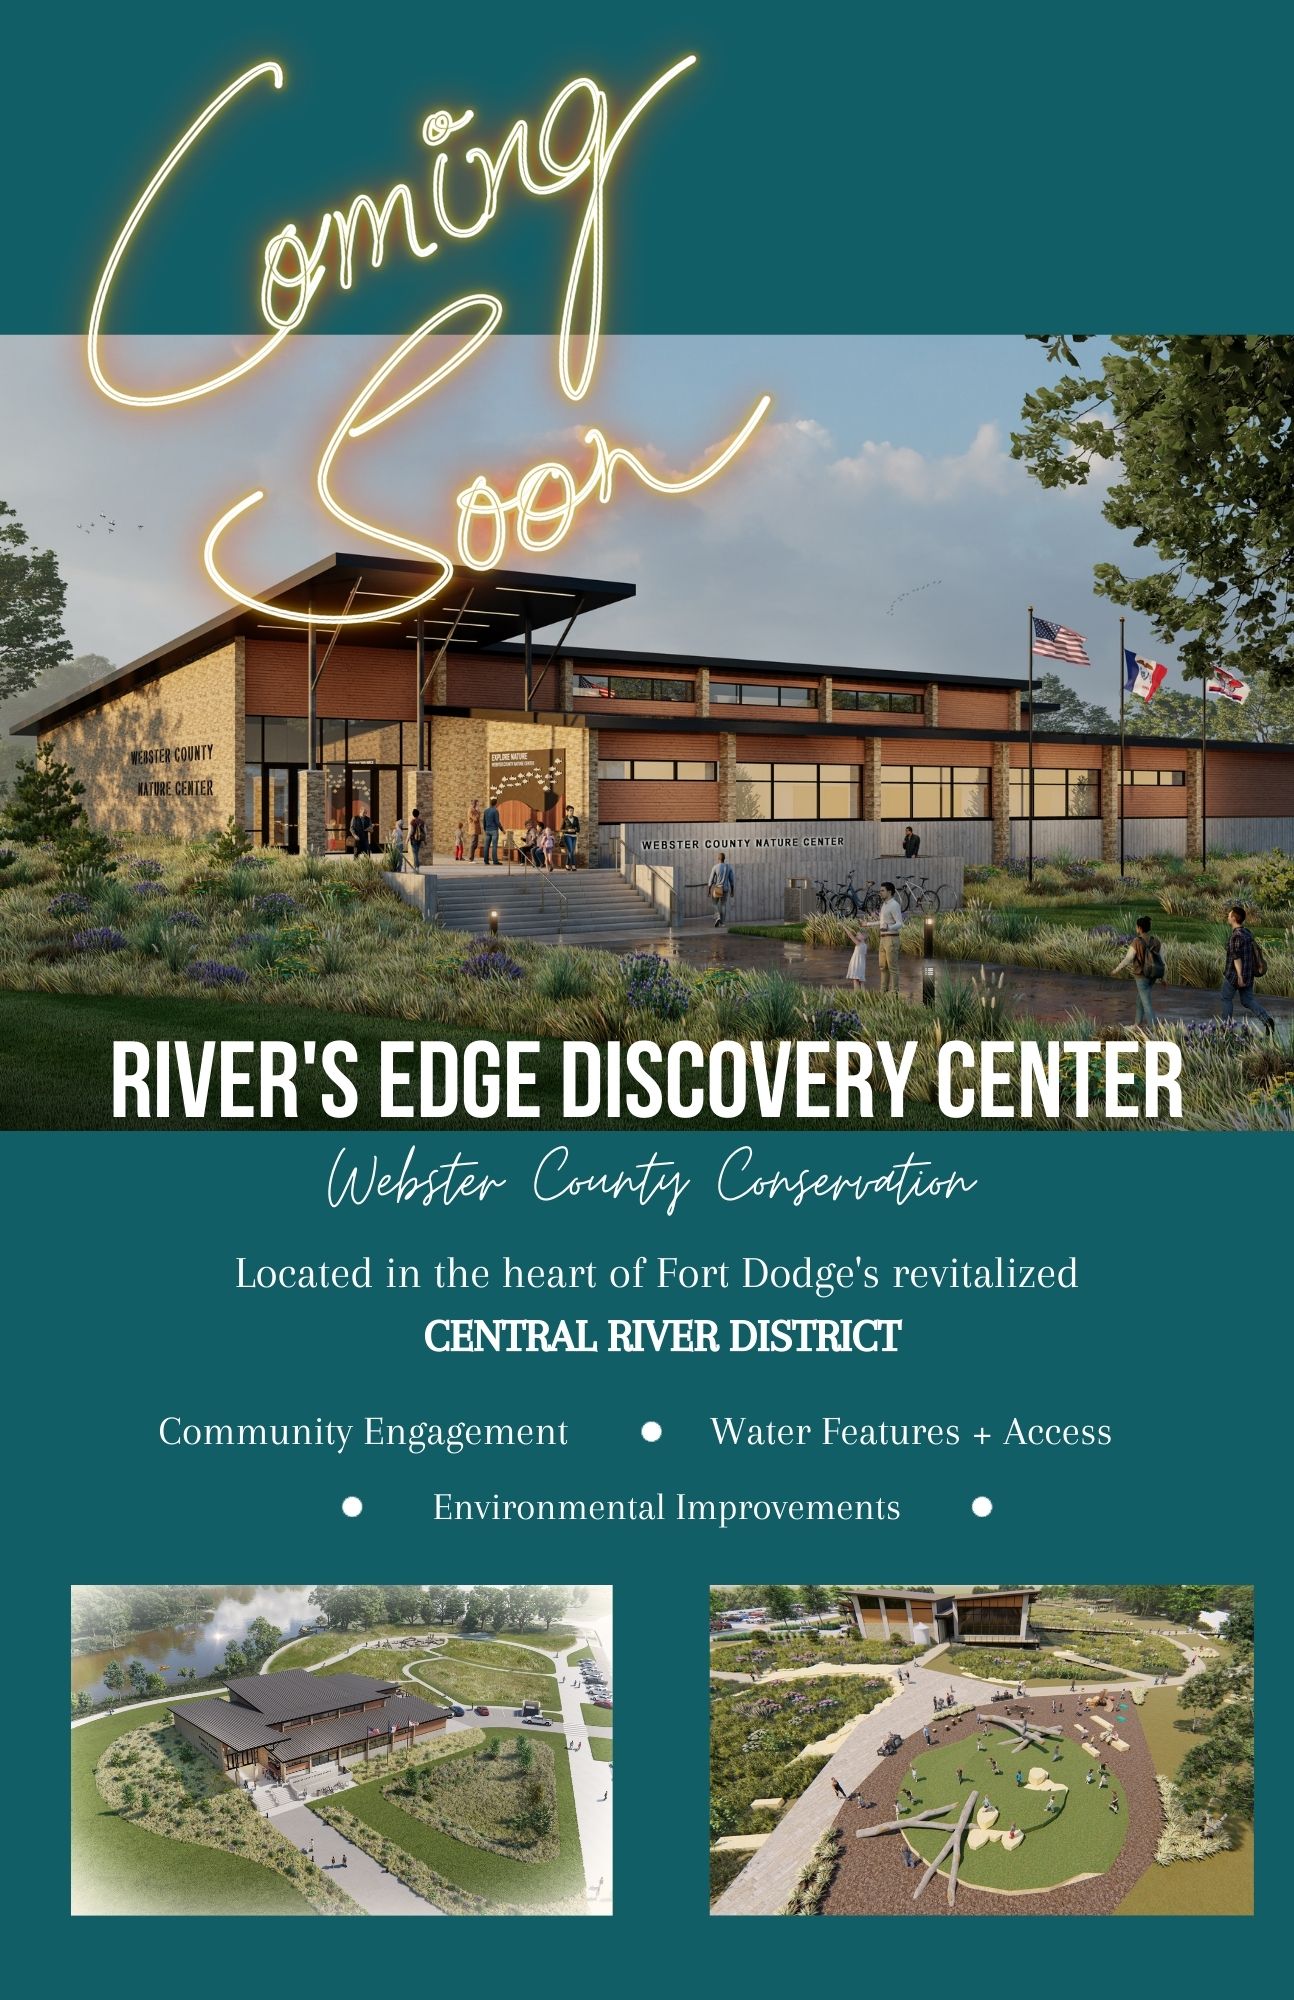 Flier for new conservation discovery center.